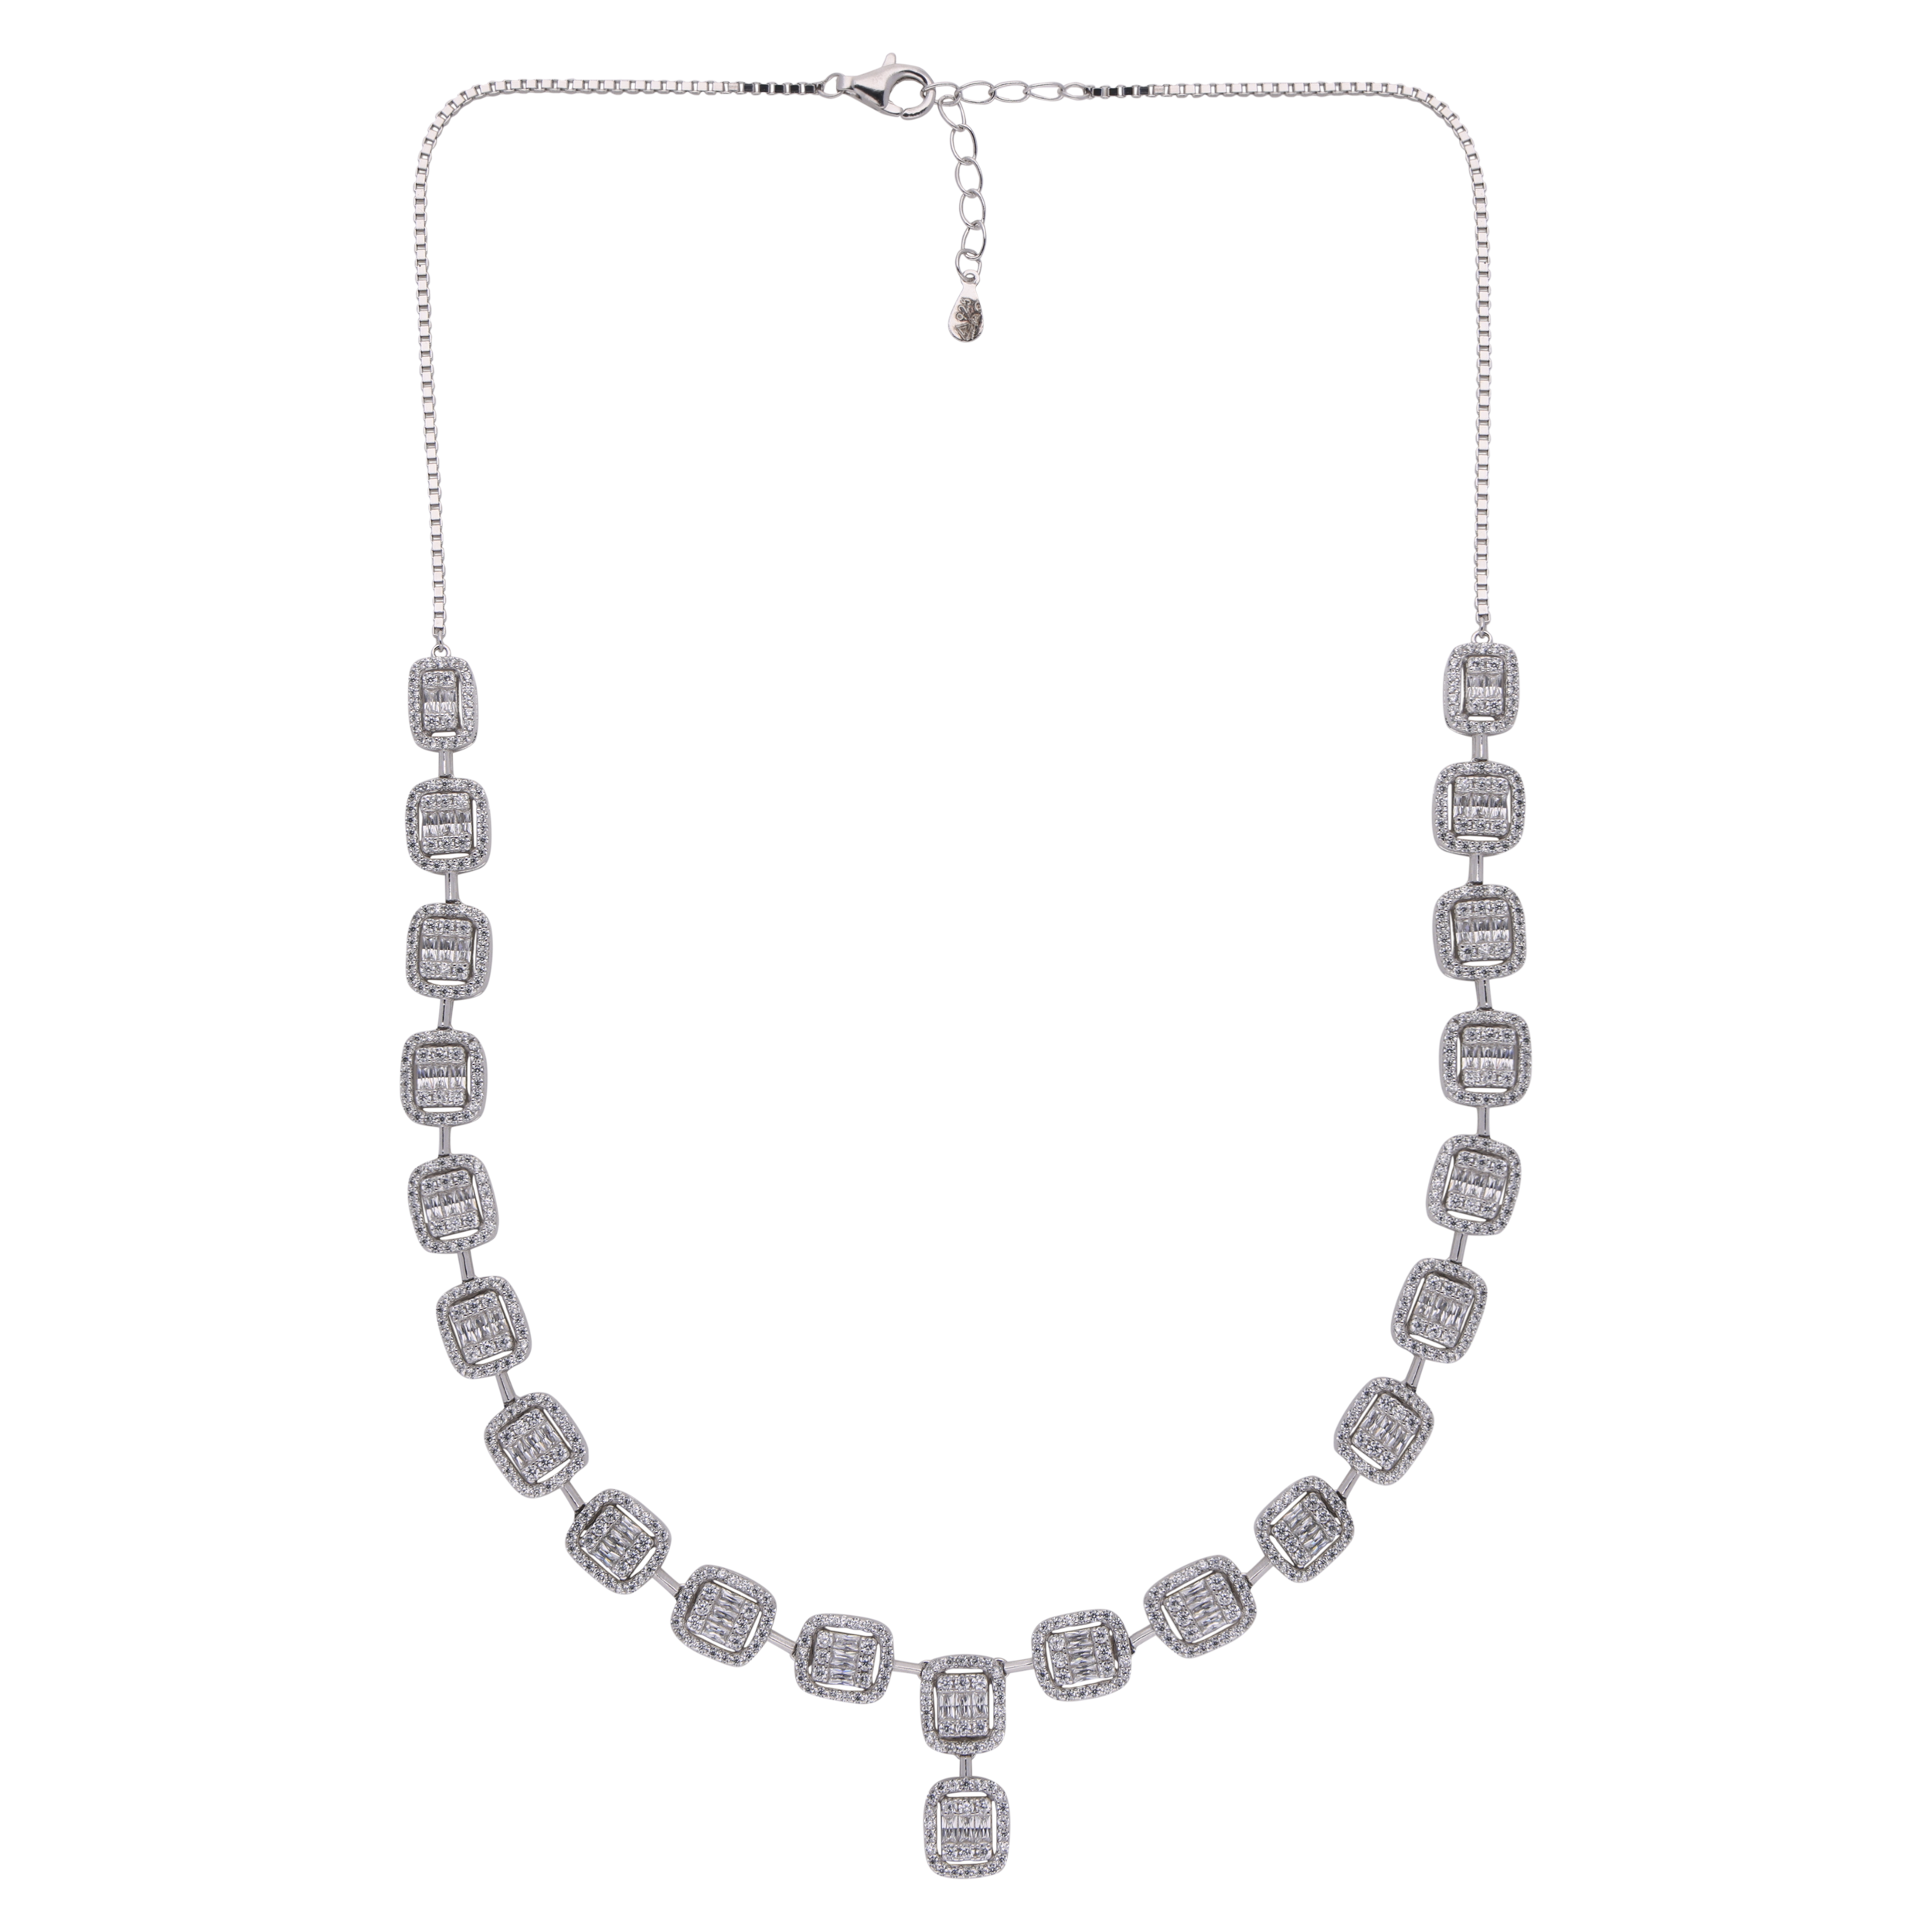 Sterling Silver Lightweight Fancy Necklace with Cubic Zirconia | SKU : 0003109090, 0003109052, 0003109076